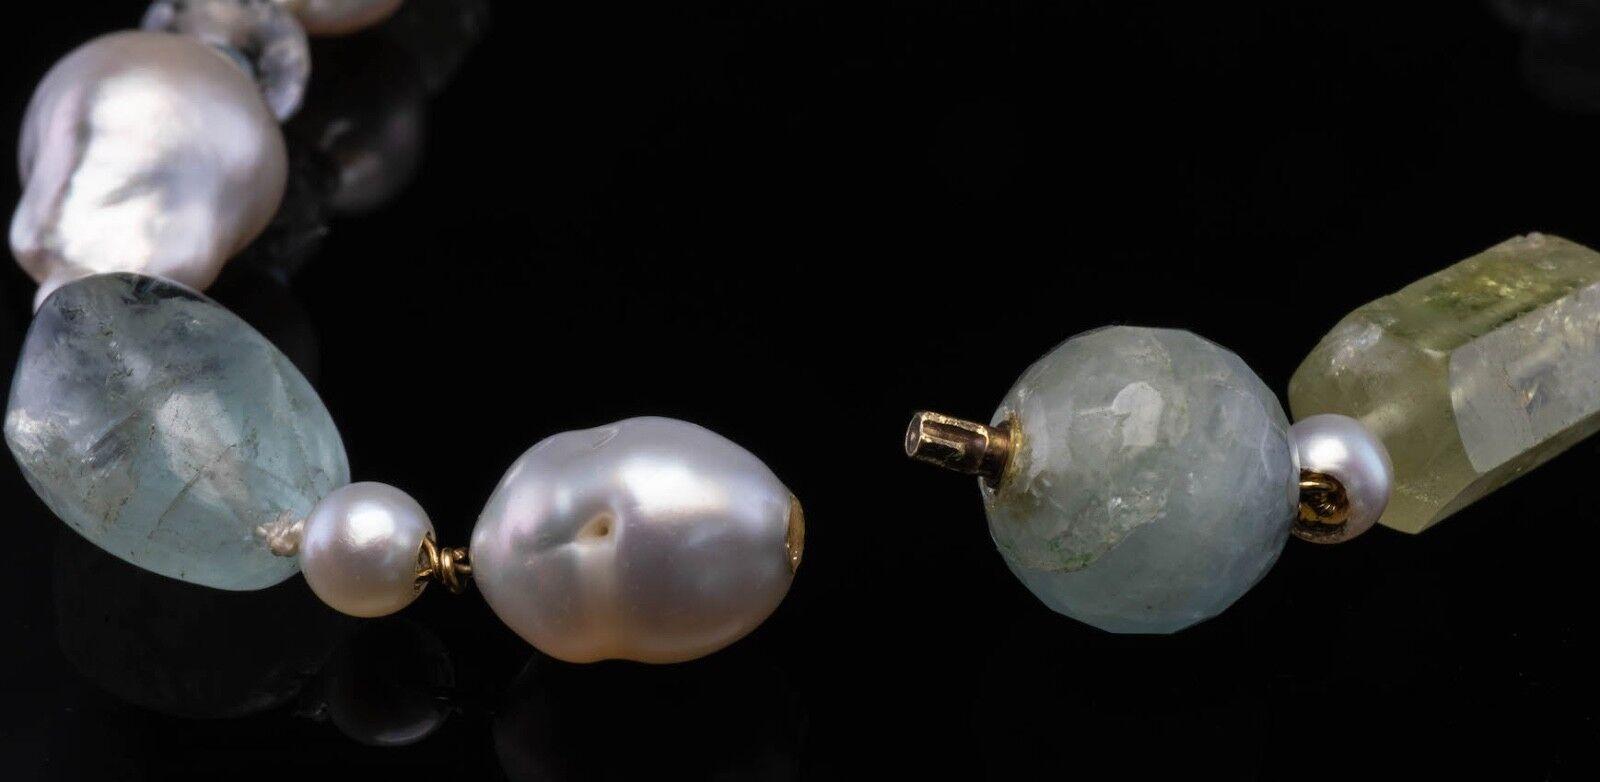 32 inch freshwater baroque pearls with mirror cut aquamarine and 18kt gold rondelles